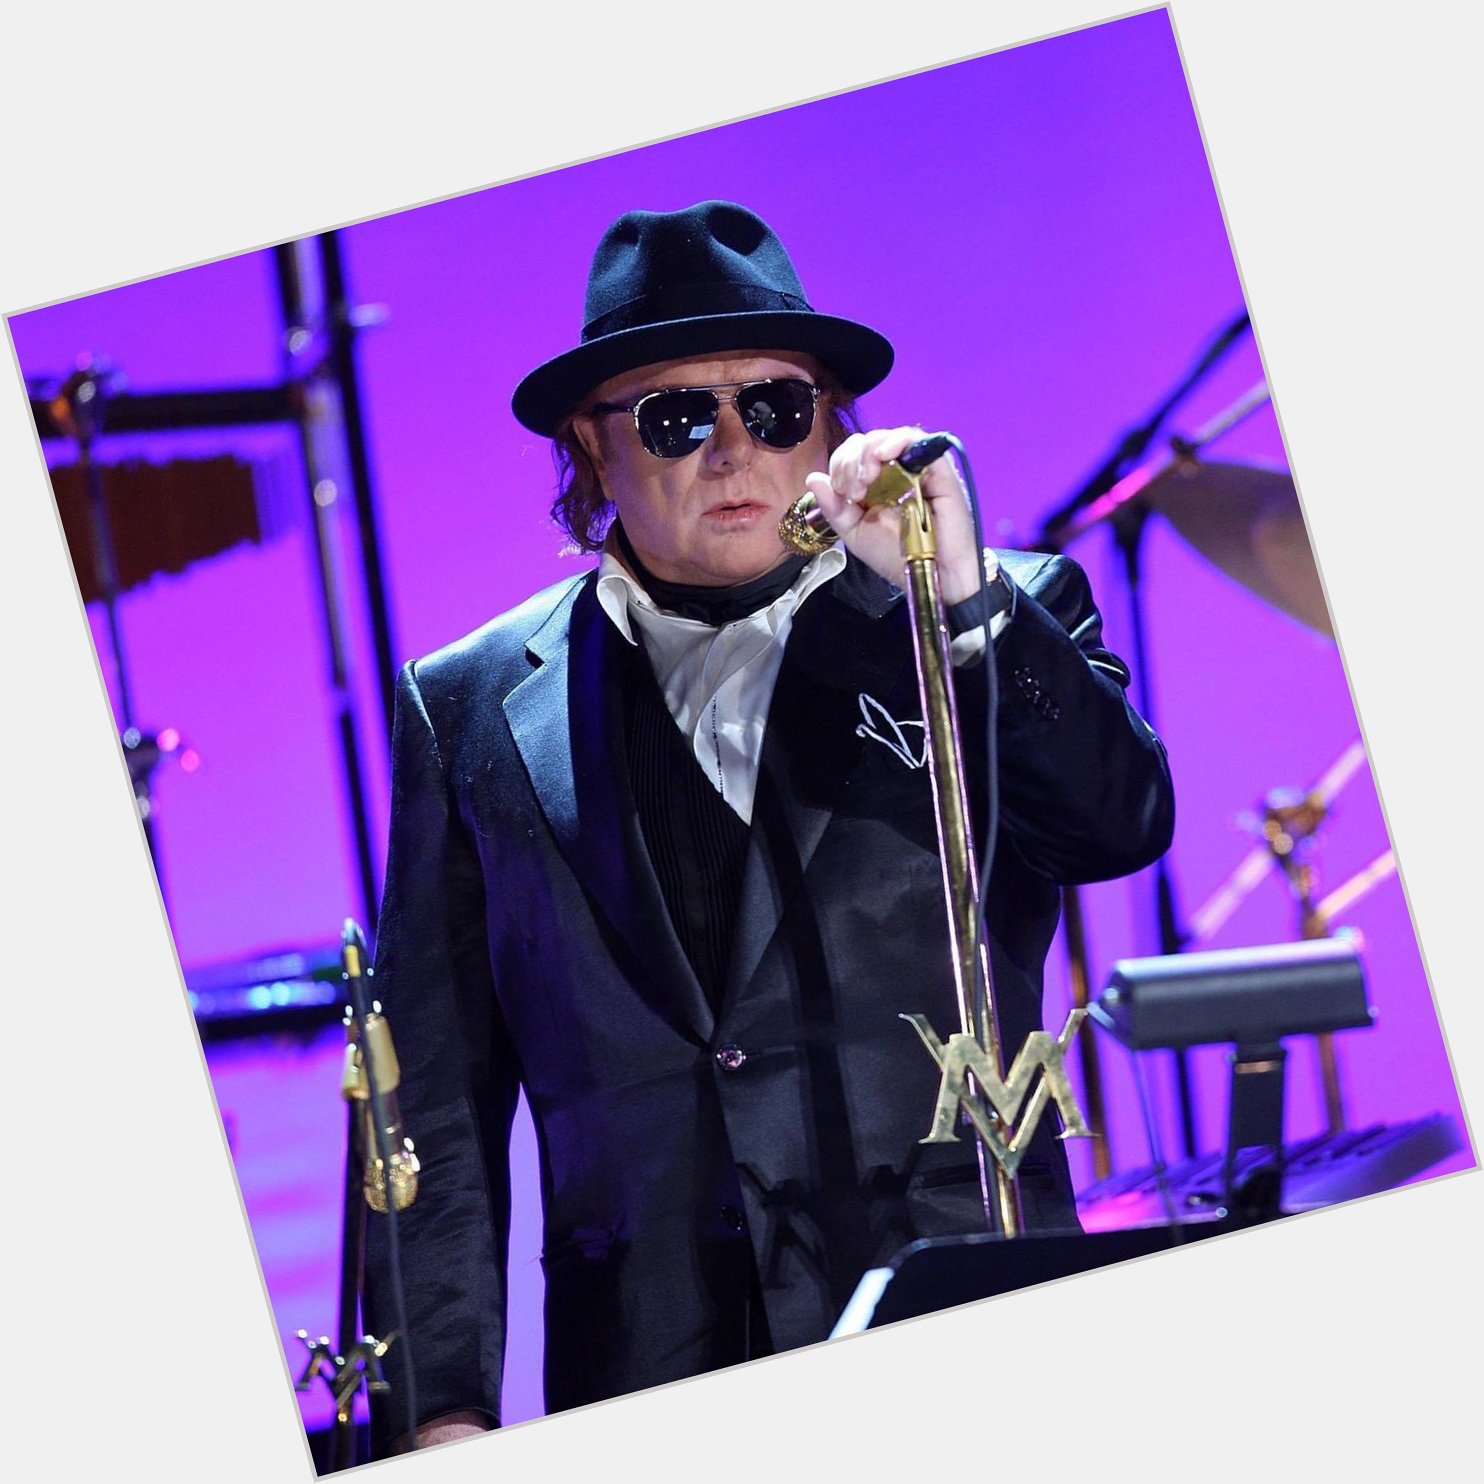 Happy 75th birthday to Van Morrison! Which one of his songs is your favorite? 